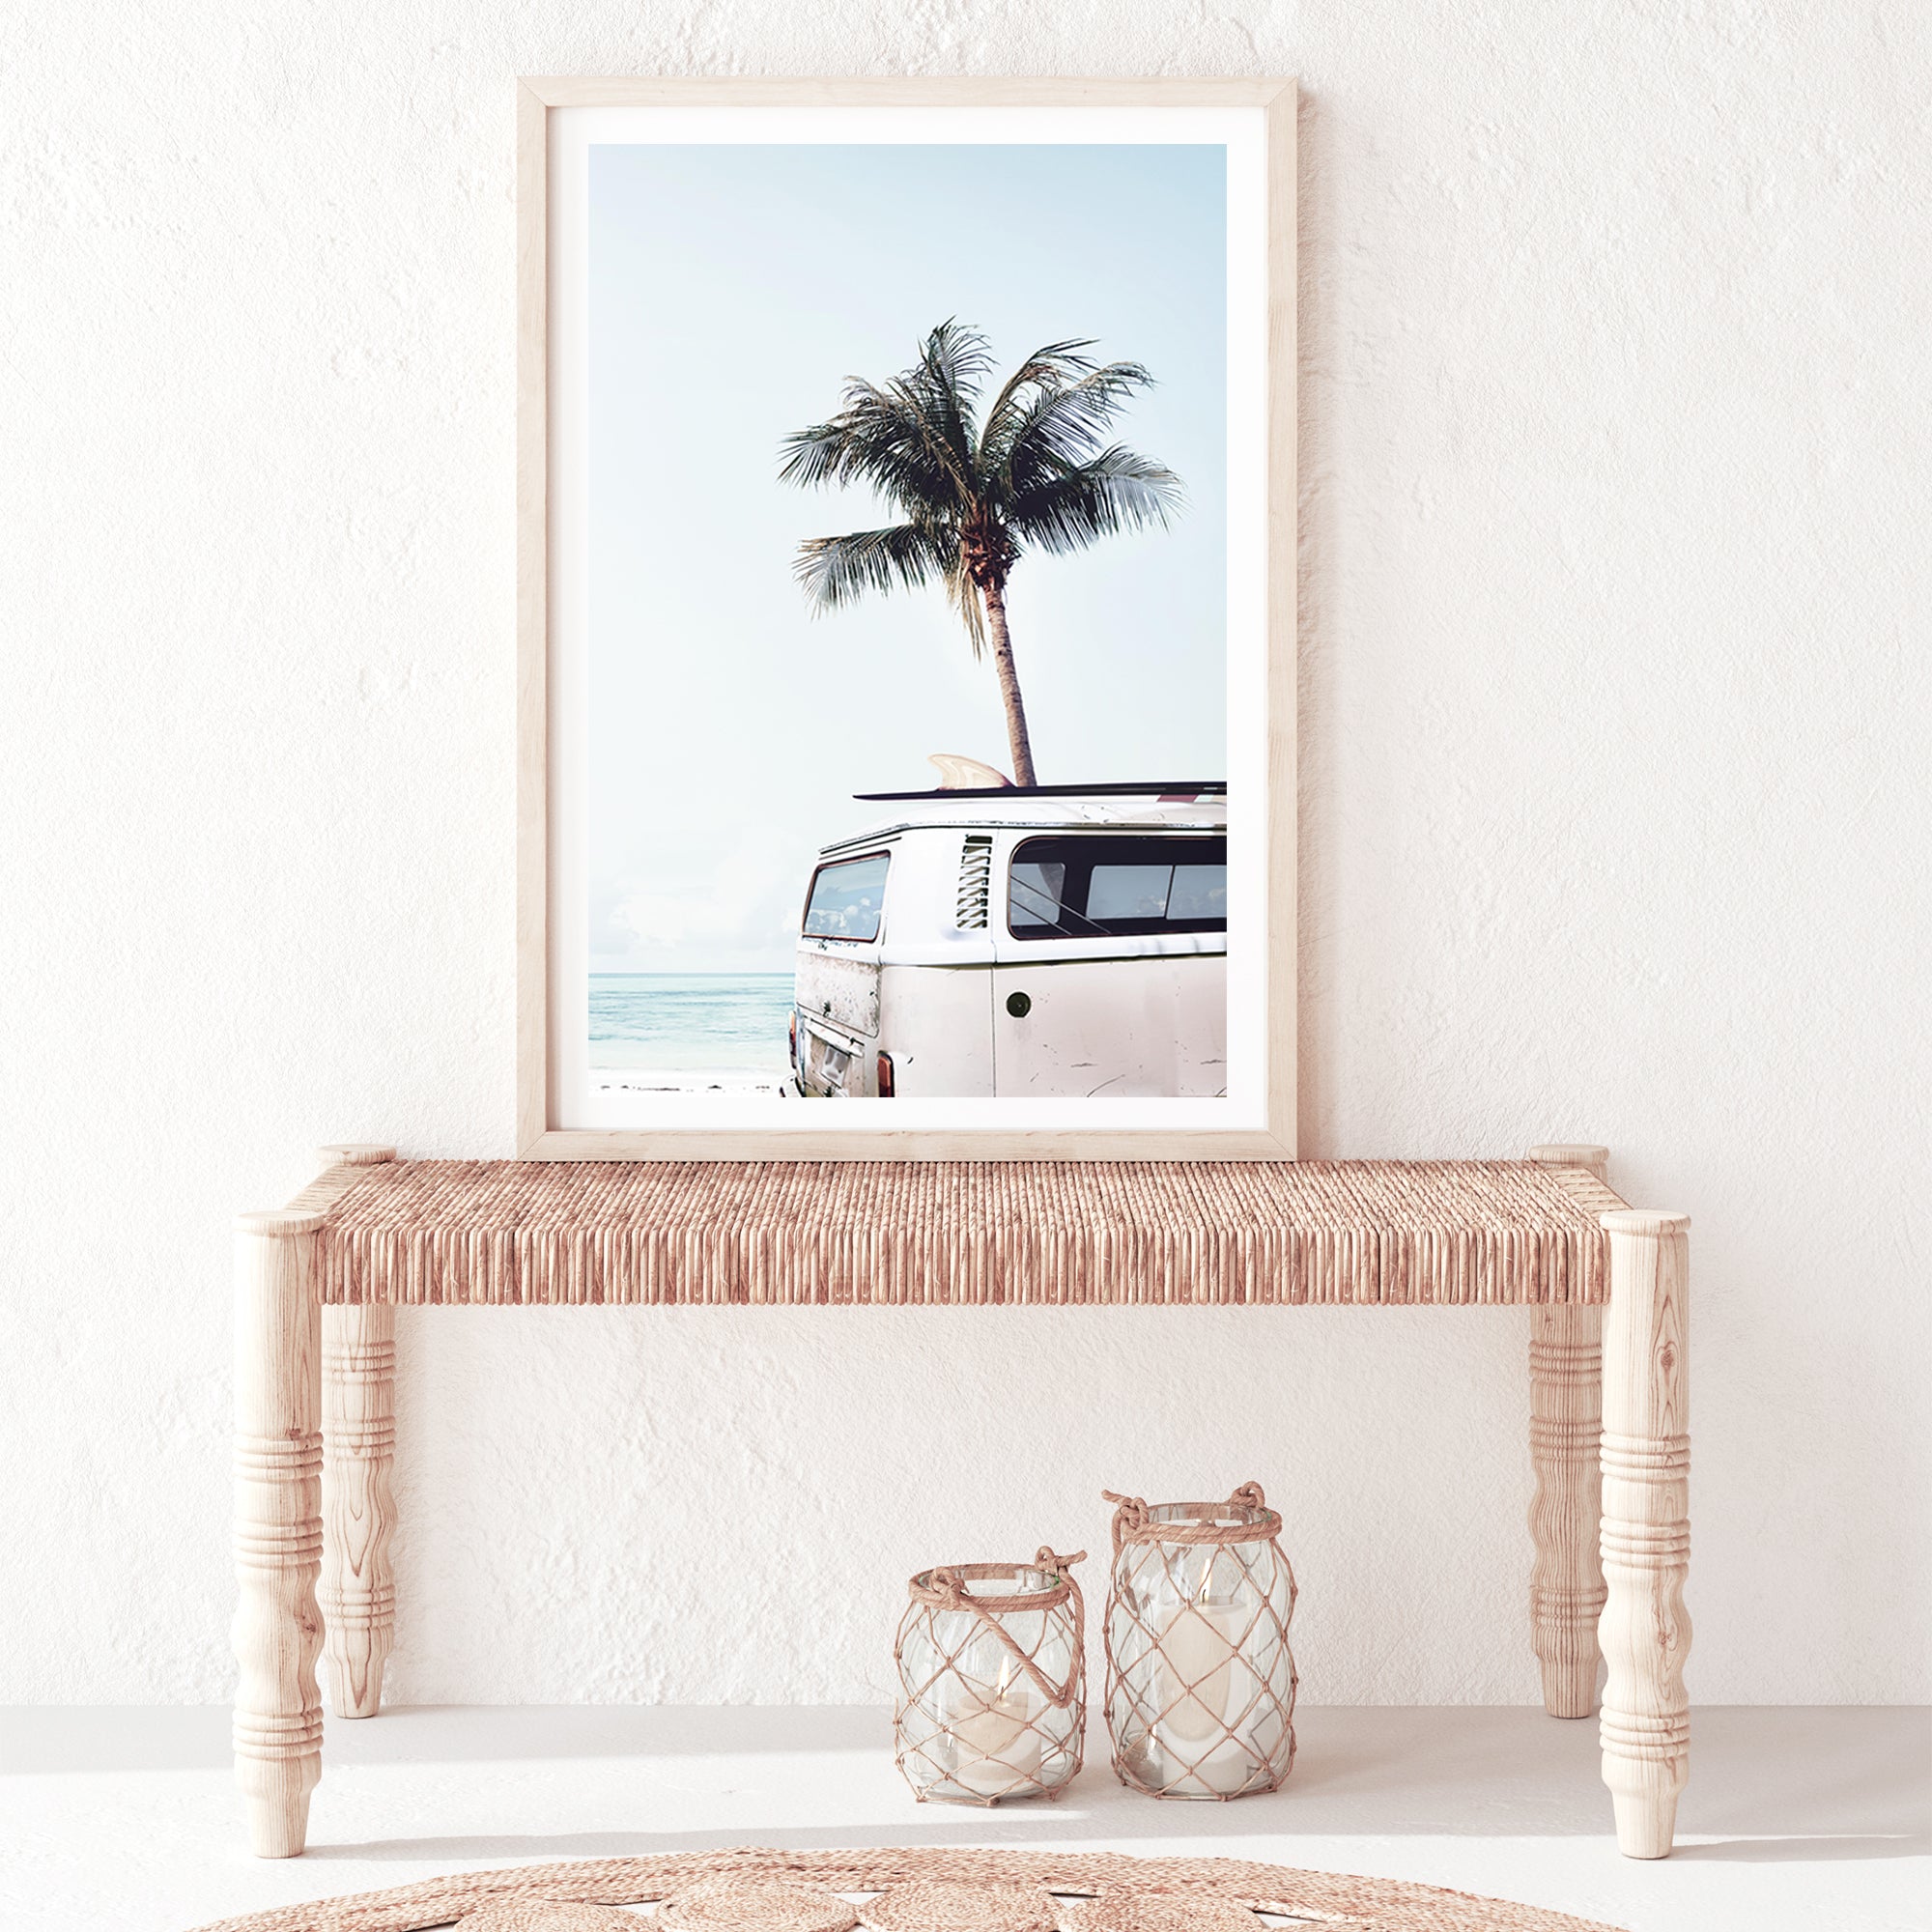 A framed or unframed canvas artwork featuring a blue Kombi van at the beach with a blue sky and palm trees.